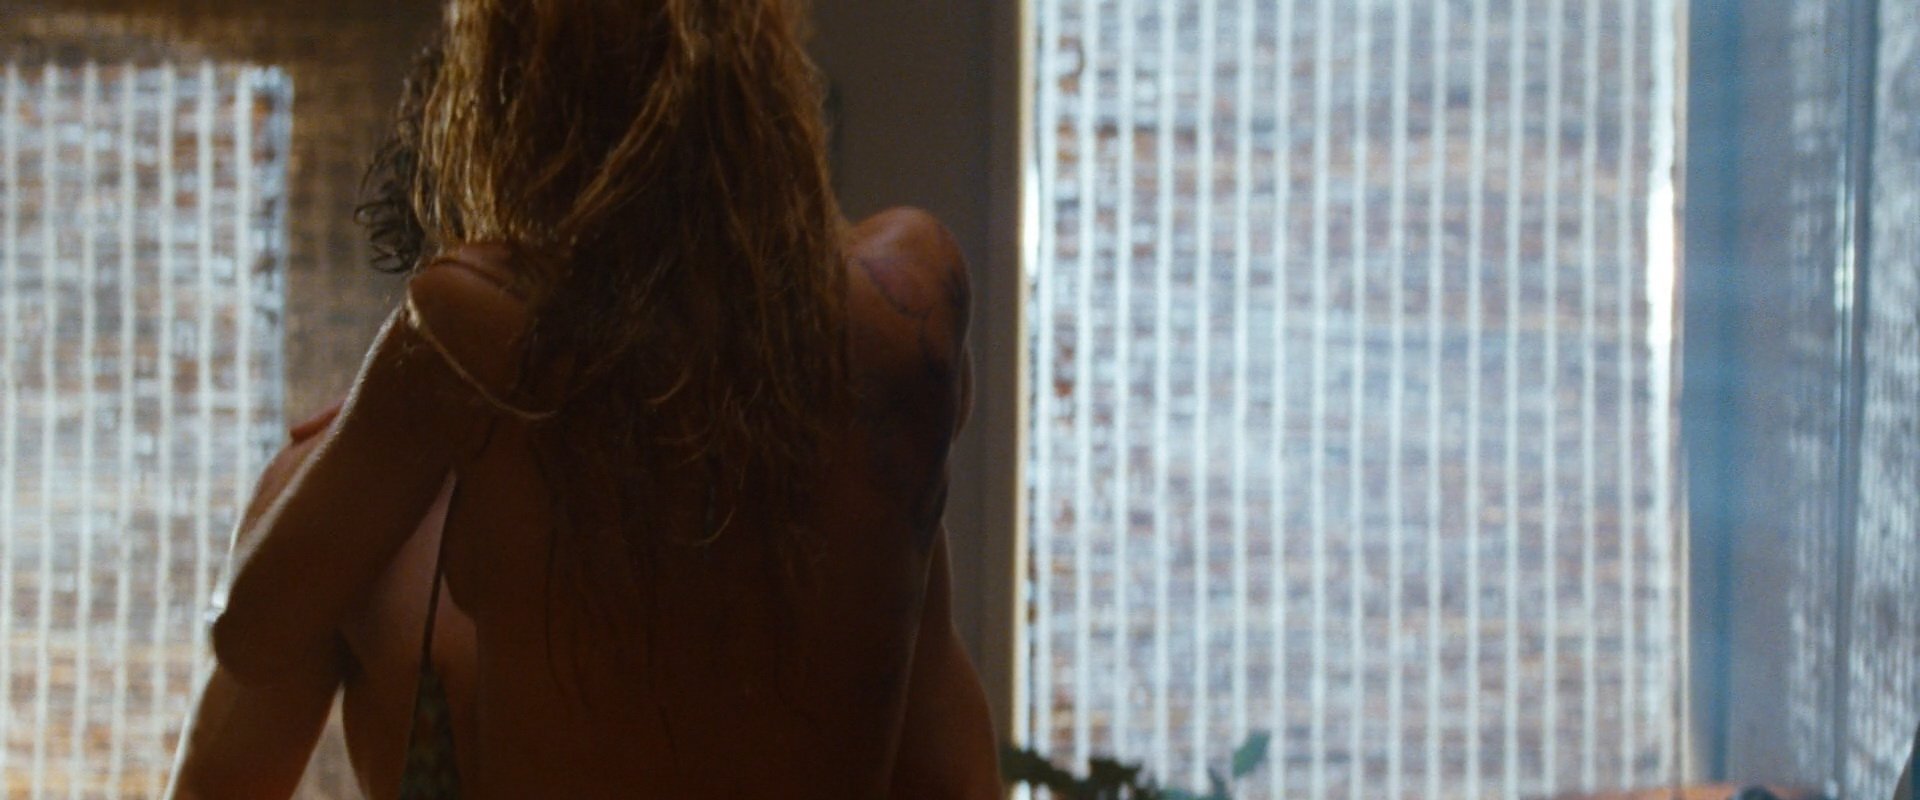 Blake Lively Sexy - Savages (2012) HD 1080p (6 Pics + Gifs & Videos)